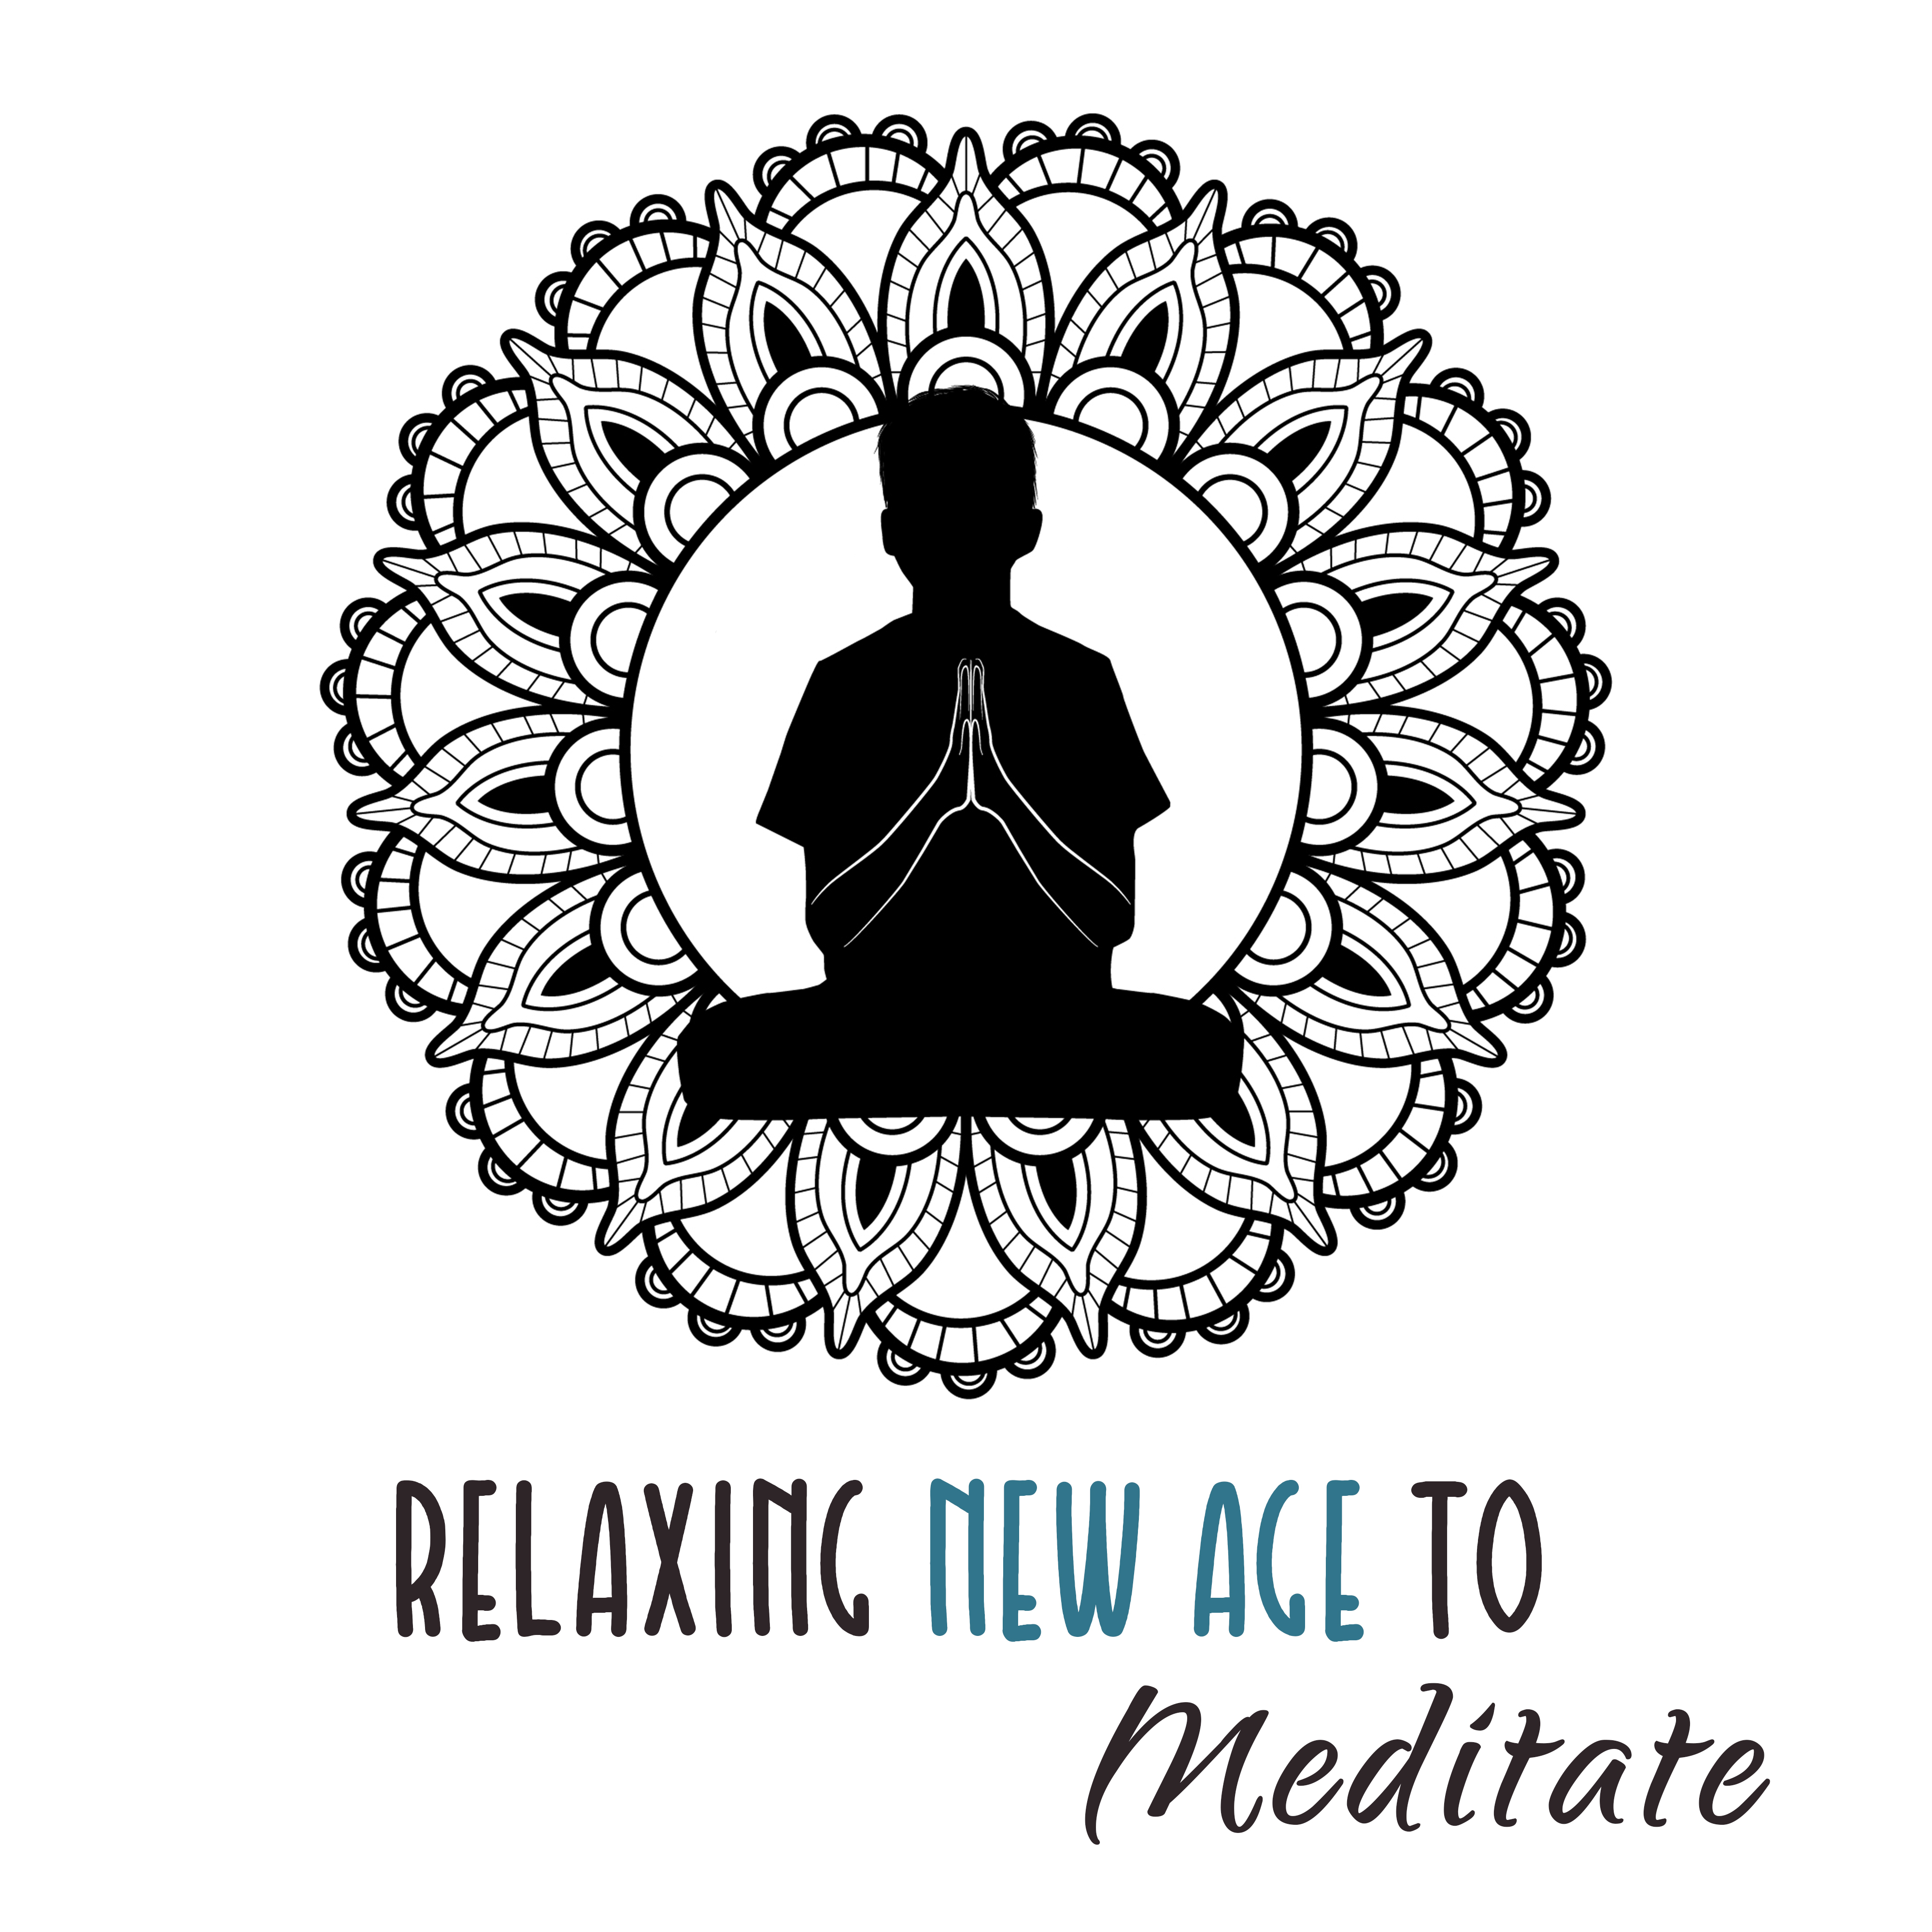 Relaxing New Age to Meditate